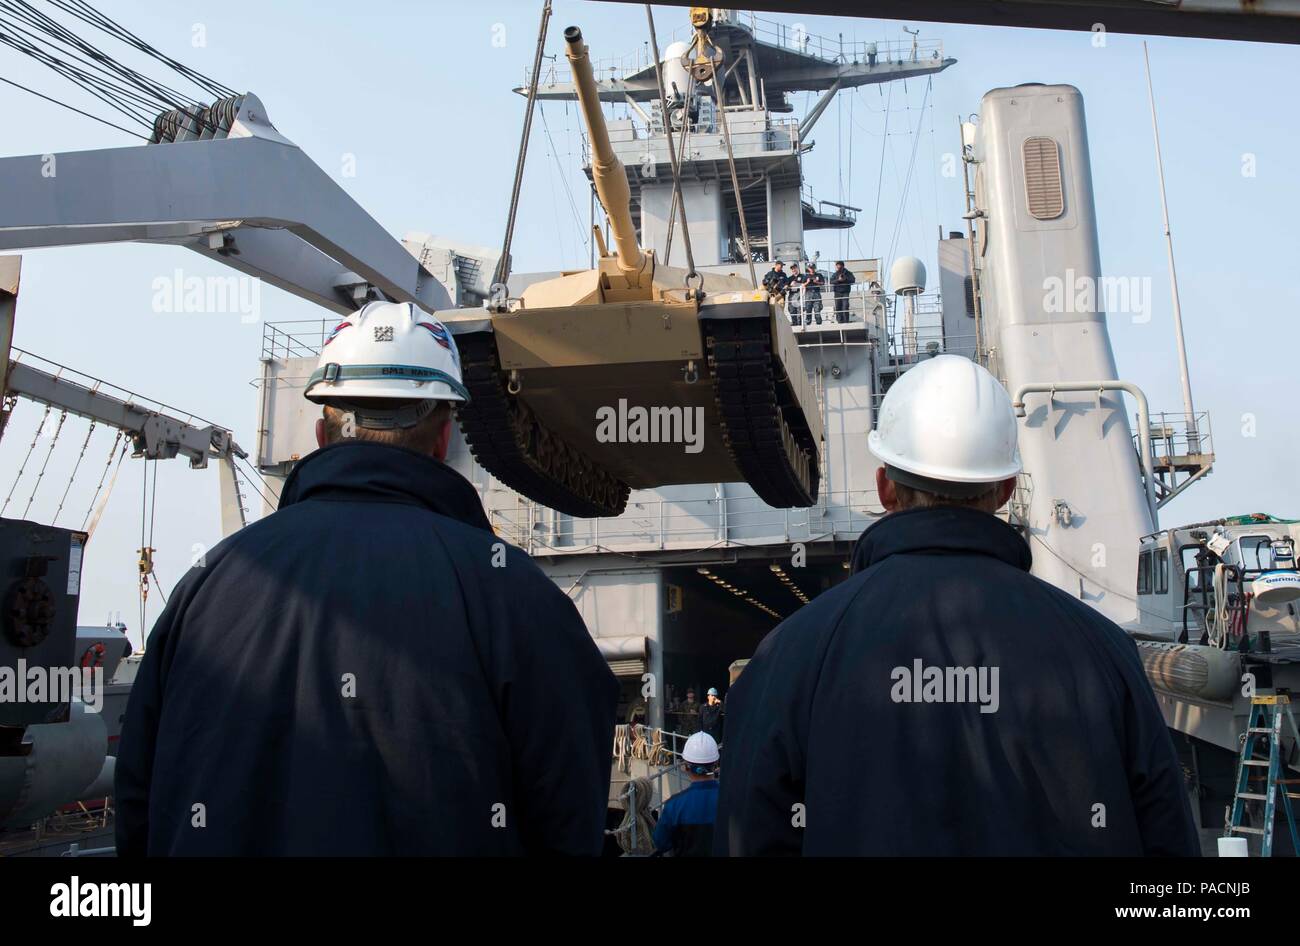 160314-N-RM689-066  GWANGYANG, Republic of Korea (Mar. 14, 2016)- Two Sailors from amphibious dock landing ship USS Ashland (LSD 48) act as safety officers on the boat deck as an M1A1 Abram tank attached to Delta Company 1st Tank Battalion, 1st U.S. Marine Division is lowered by two pier side cranes into the well deck of Ashland to prepare for the Assault Follow-On Echelon (AFOE) portion of Ssang Yong 16. Ashland is assigned to the Bonhomme Richard Expeditionary Strike Group and is participating in Ssang Yong 16, a biennial combined amphibious exercise conducted by forward-deployed U.S. forces Stock Photo